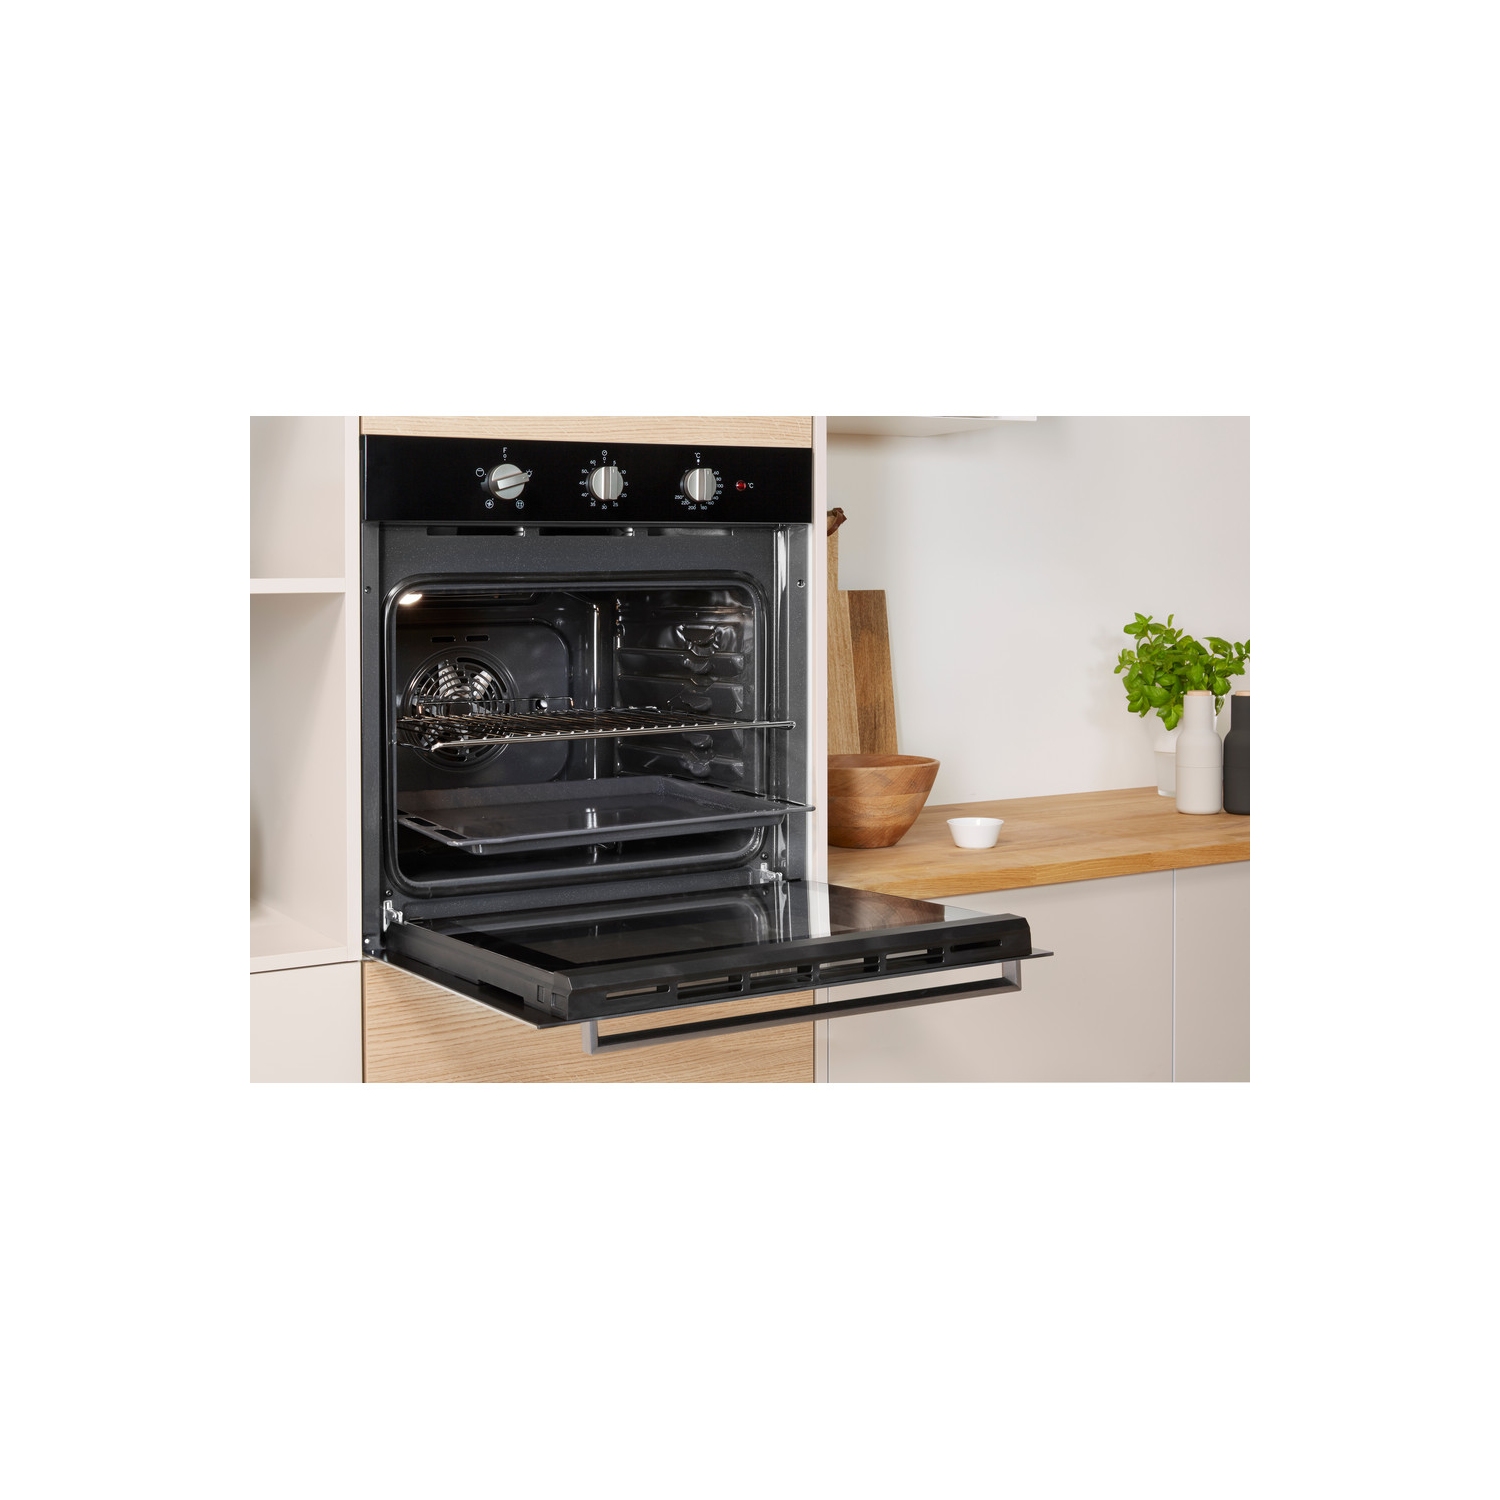 Indesit Built In Electric Single Oven - Black - A Rated - 3